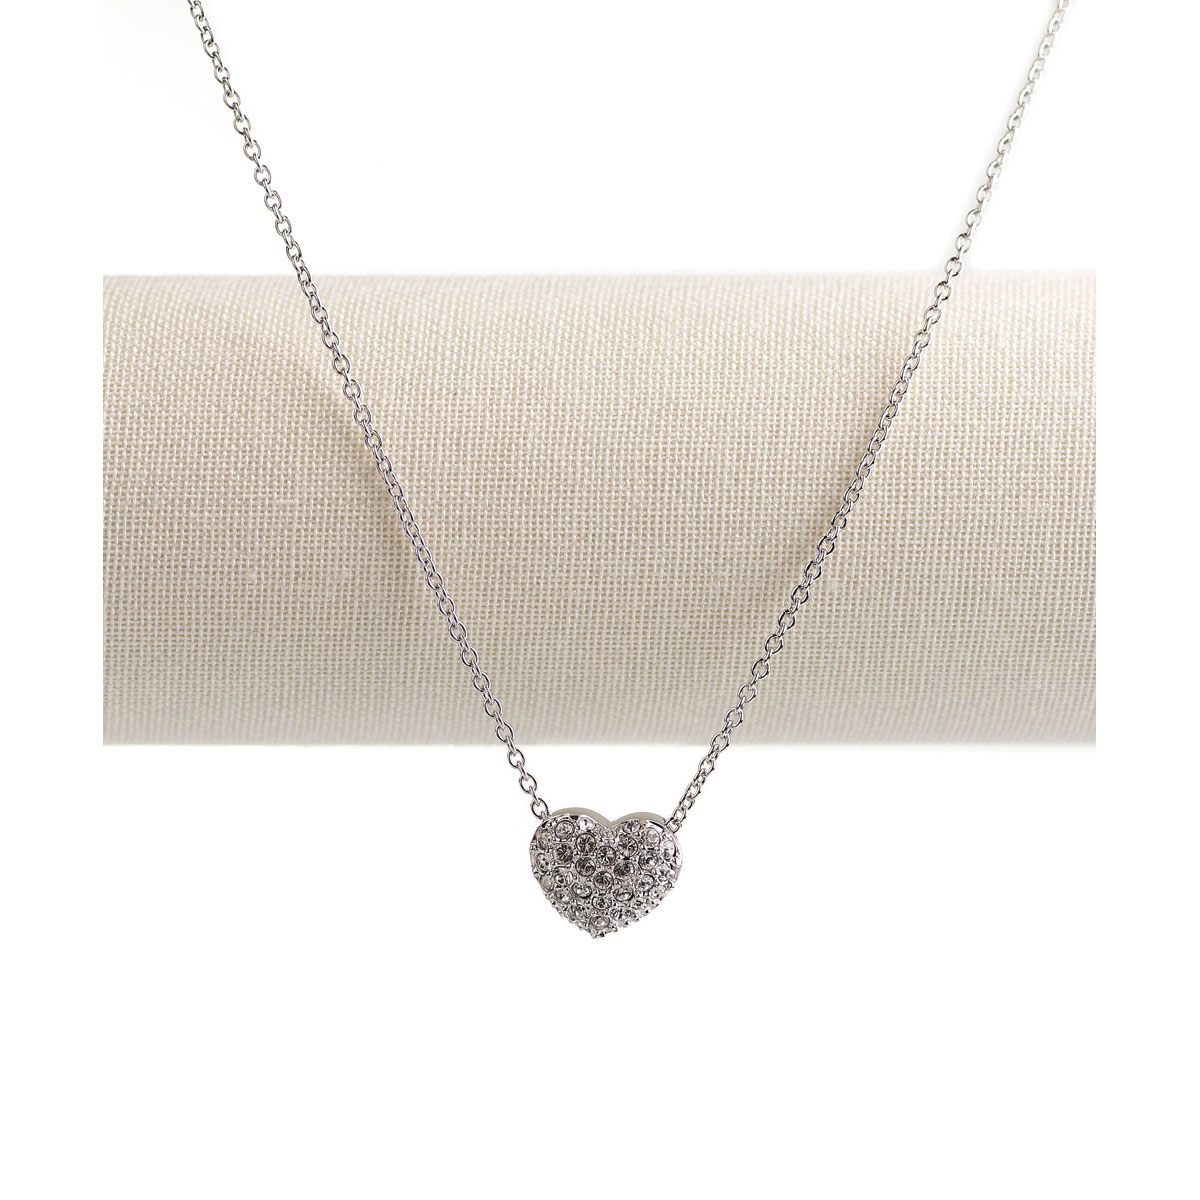 Swarovski Rhodium and Crystal Pave Heart Pendent Necklace | Crystal ...